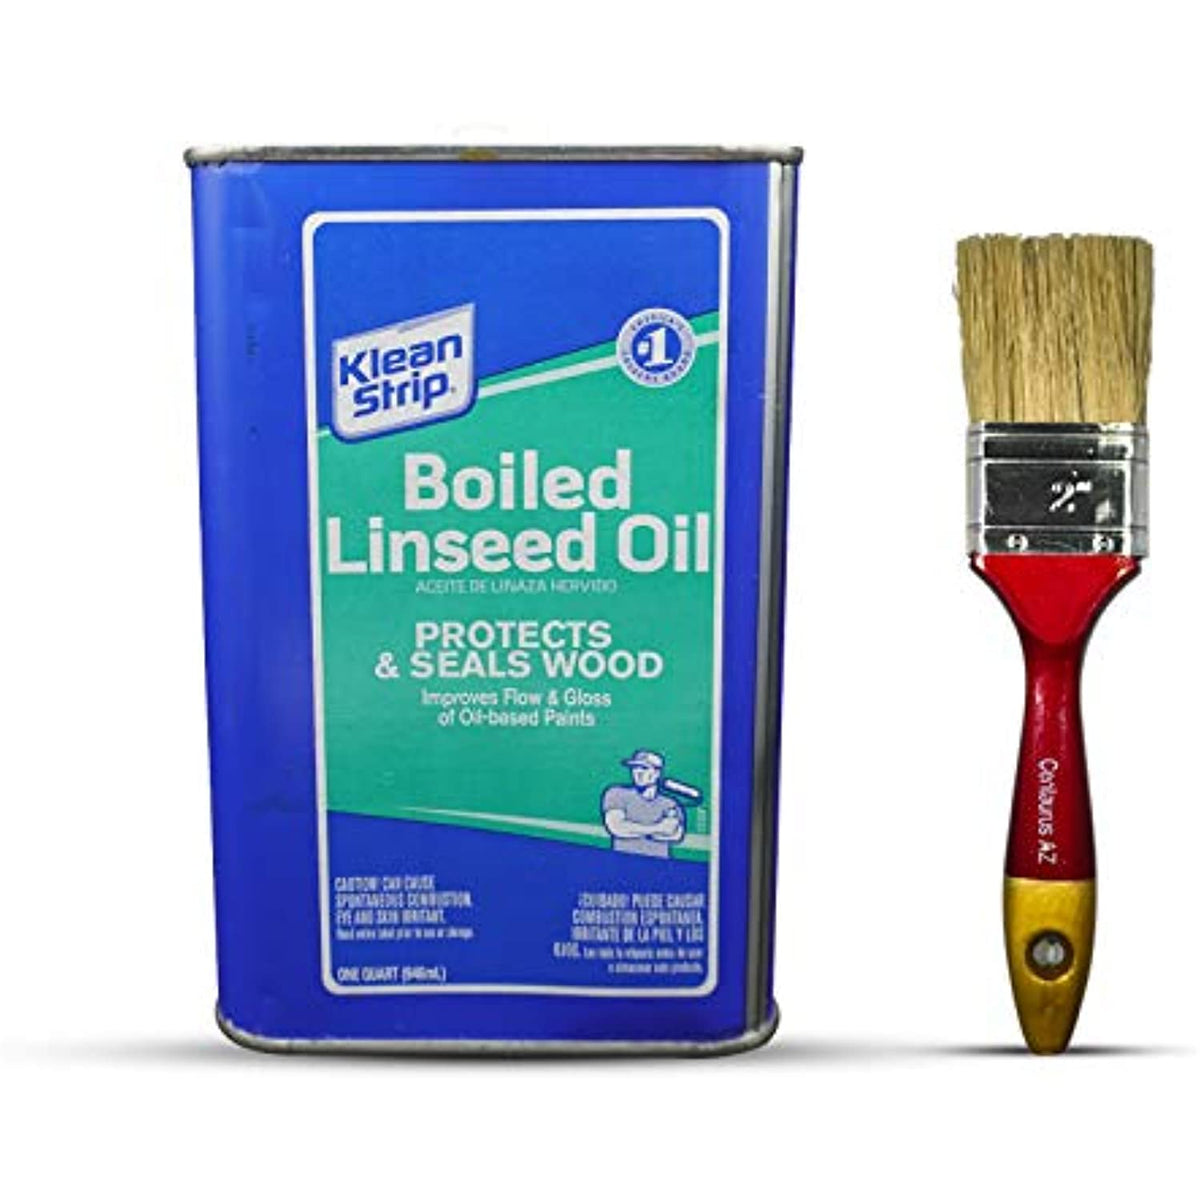 Klean-Strip 5 Gal. Boiled Linseed Oil, Paint Solvent, Protects and